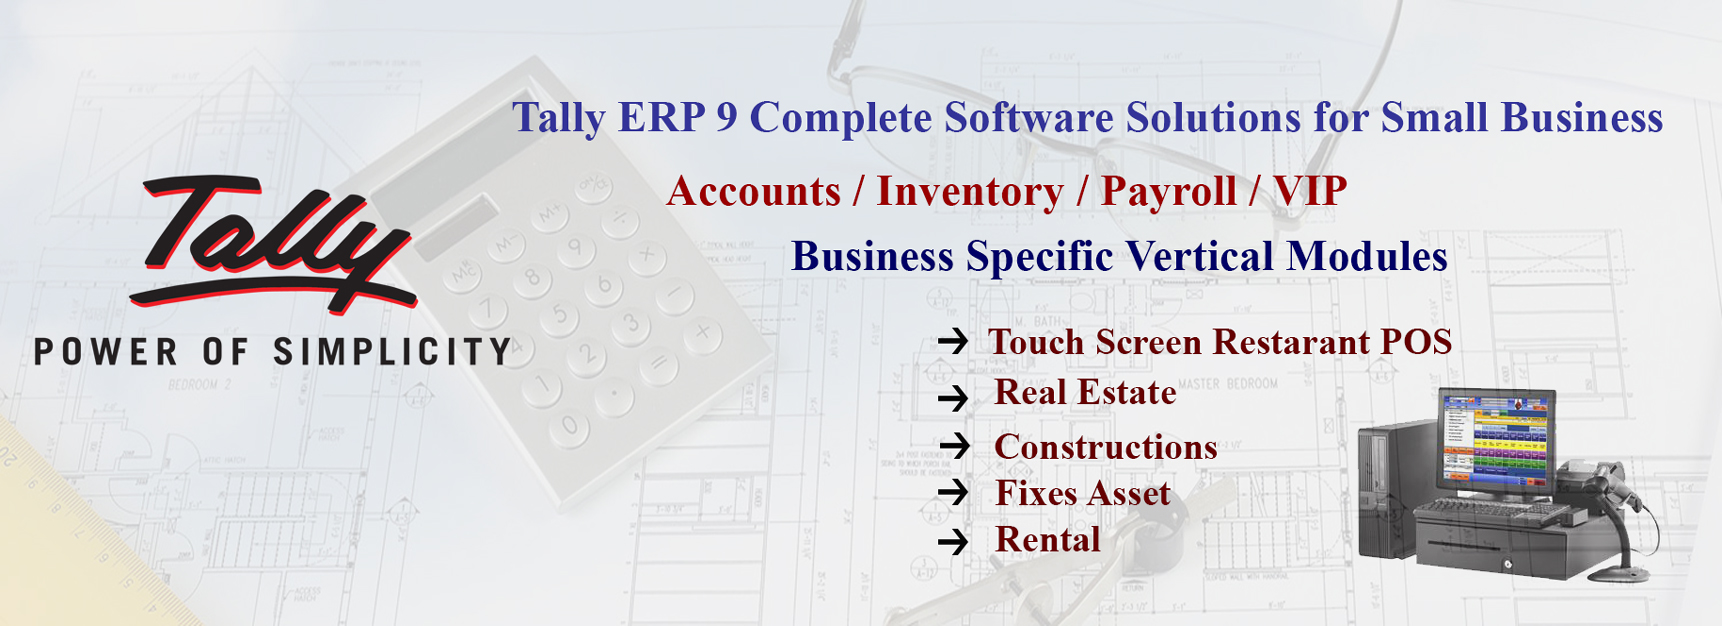 fixed assets management in tally erp 9